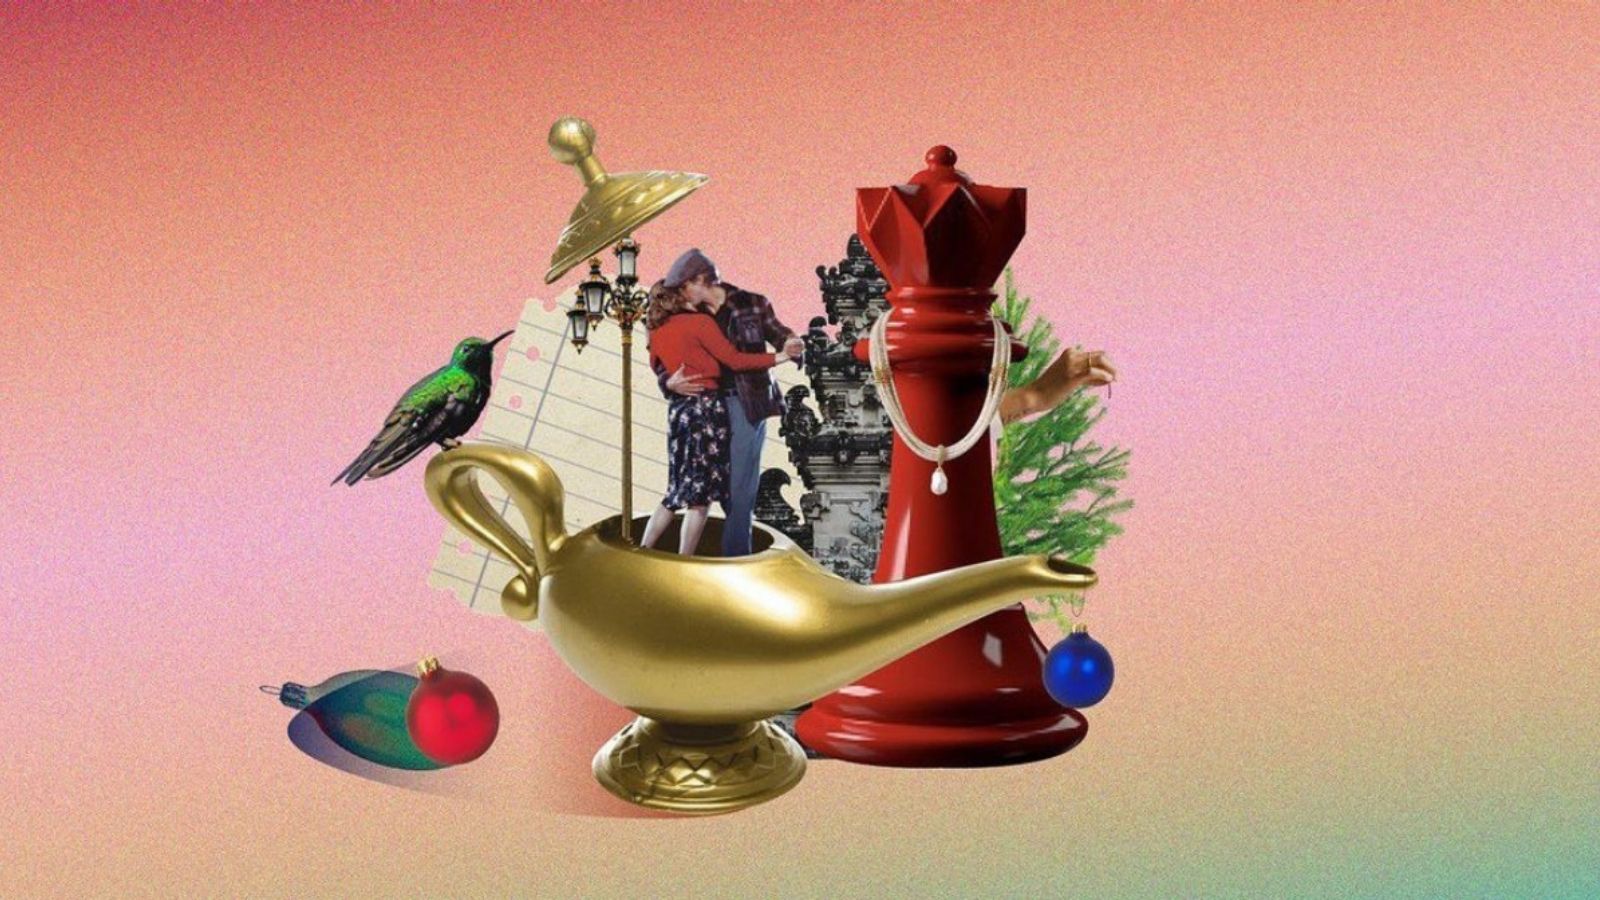 A collage of a romantic couple in a genie lamp depicting holiday destinations